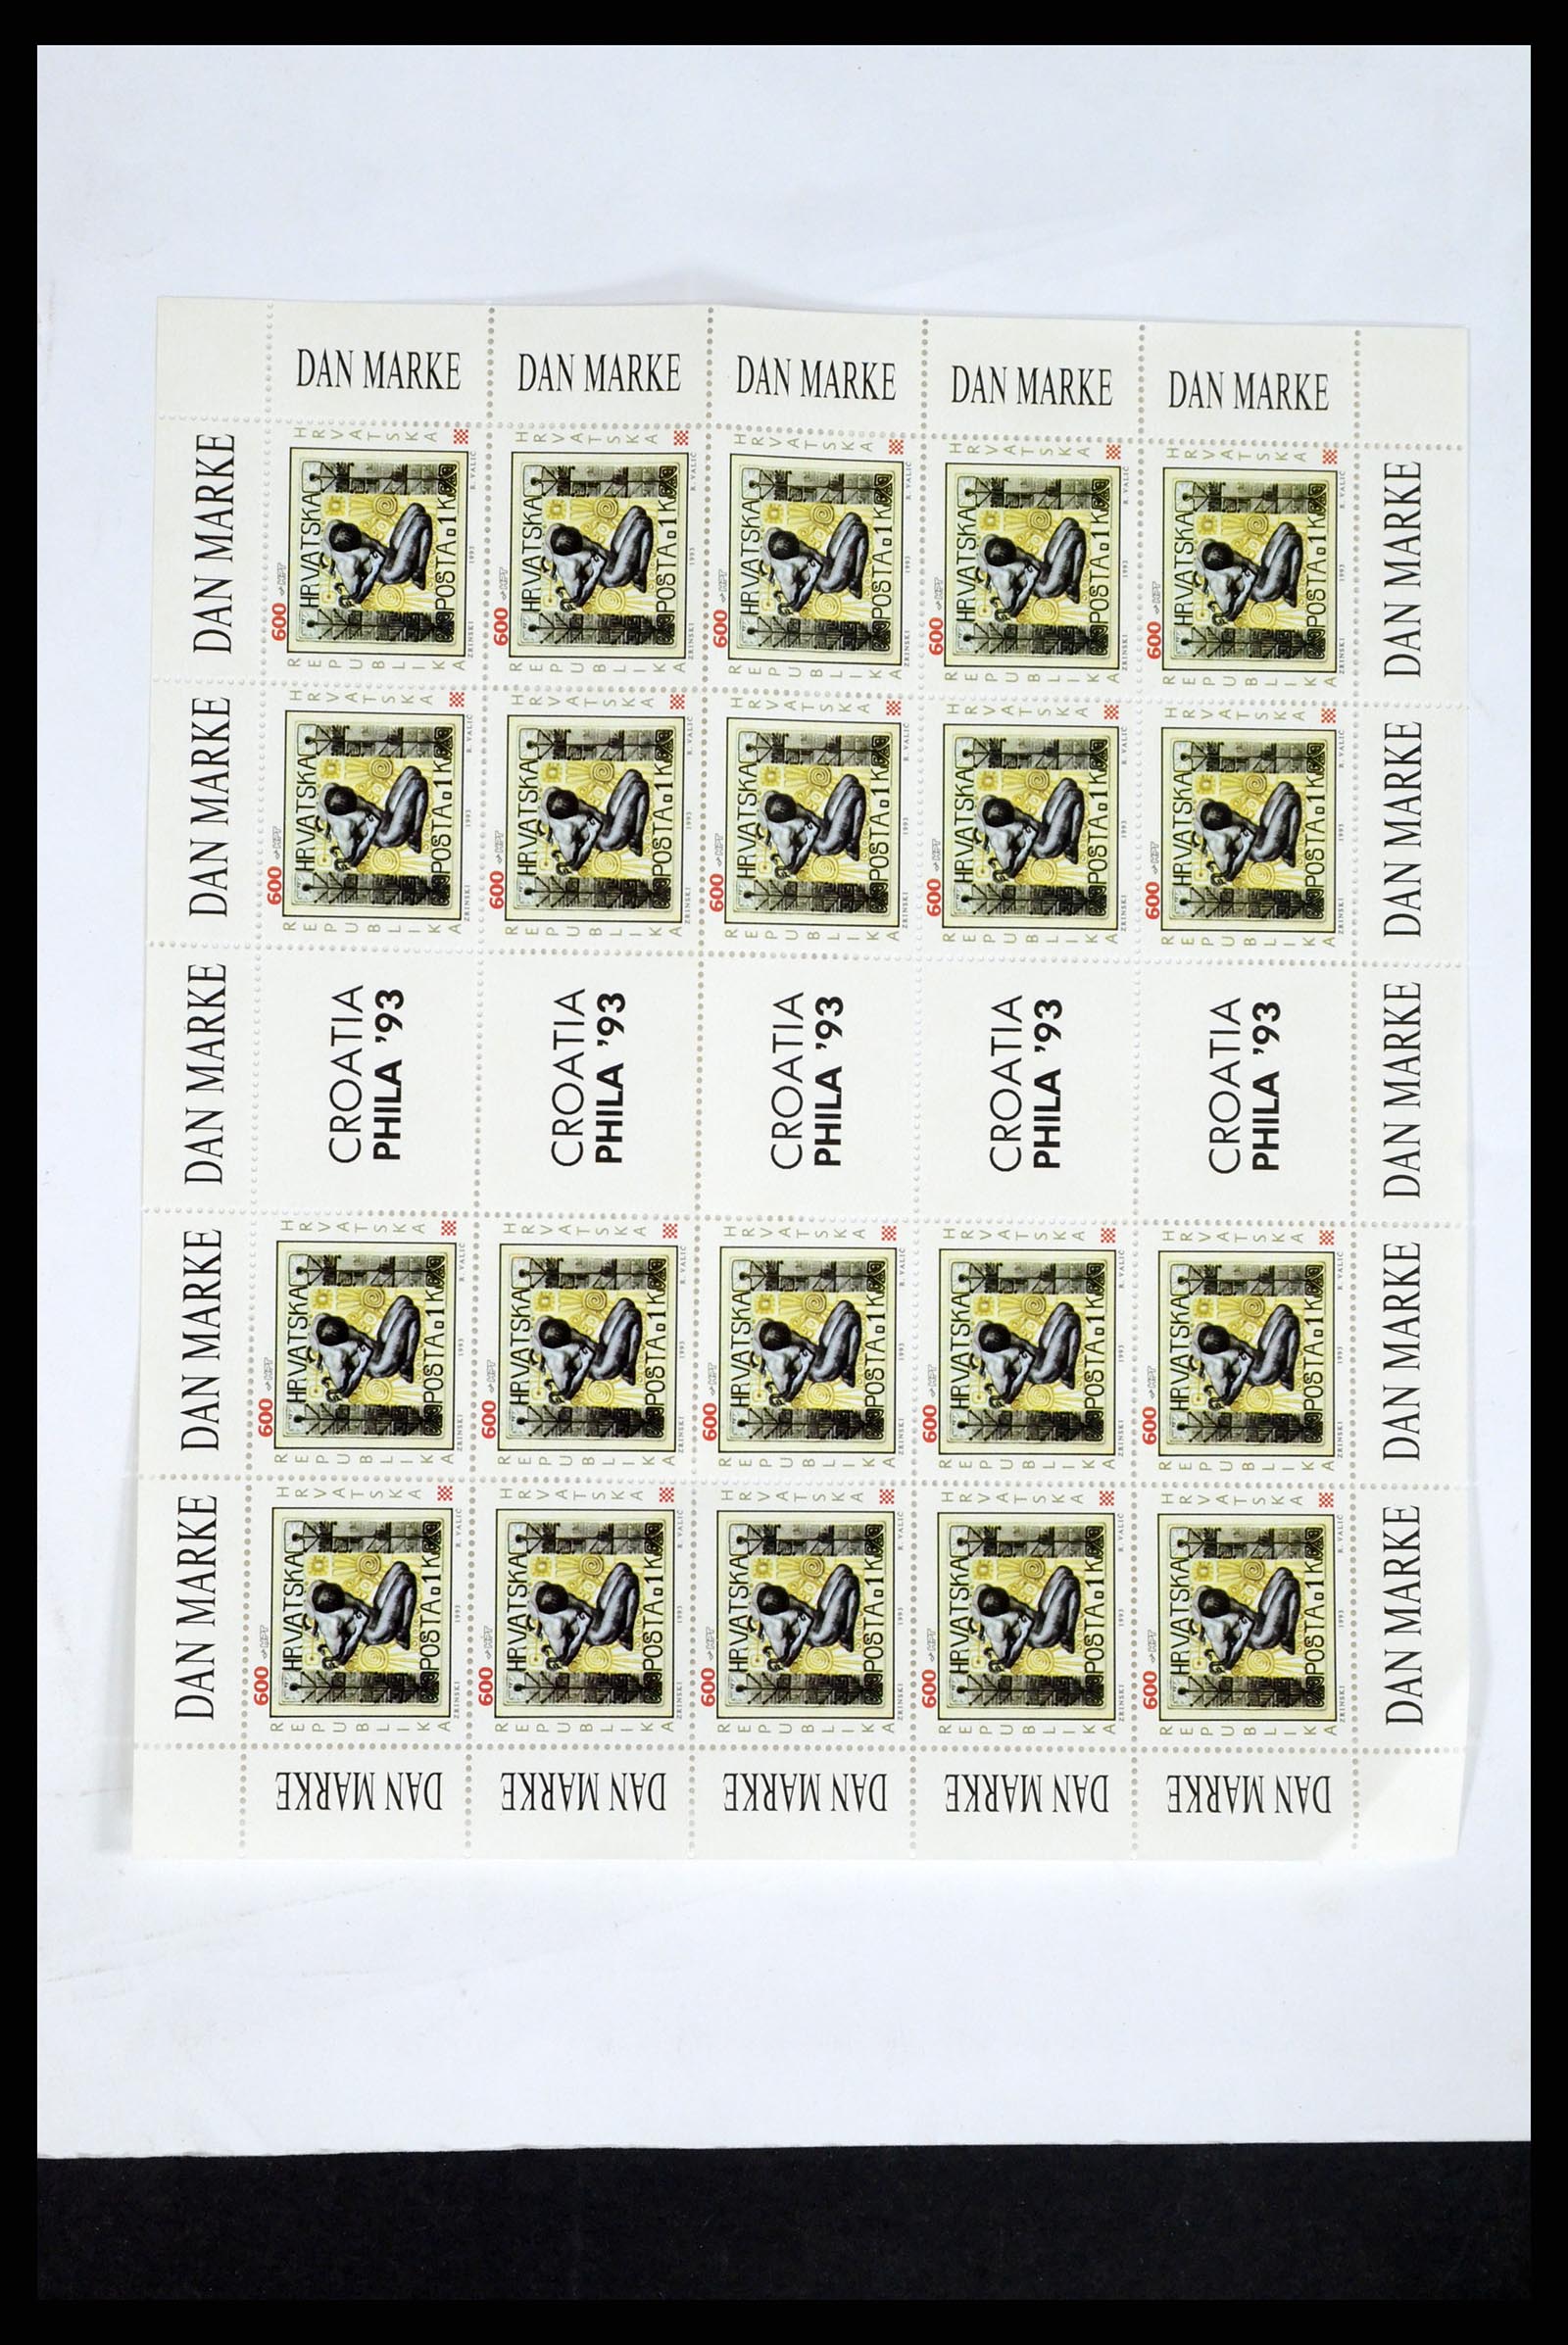 37351 053 - Stamp collection 37351 European countries MNH 1990-2000.